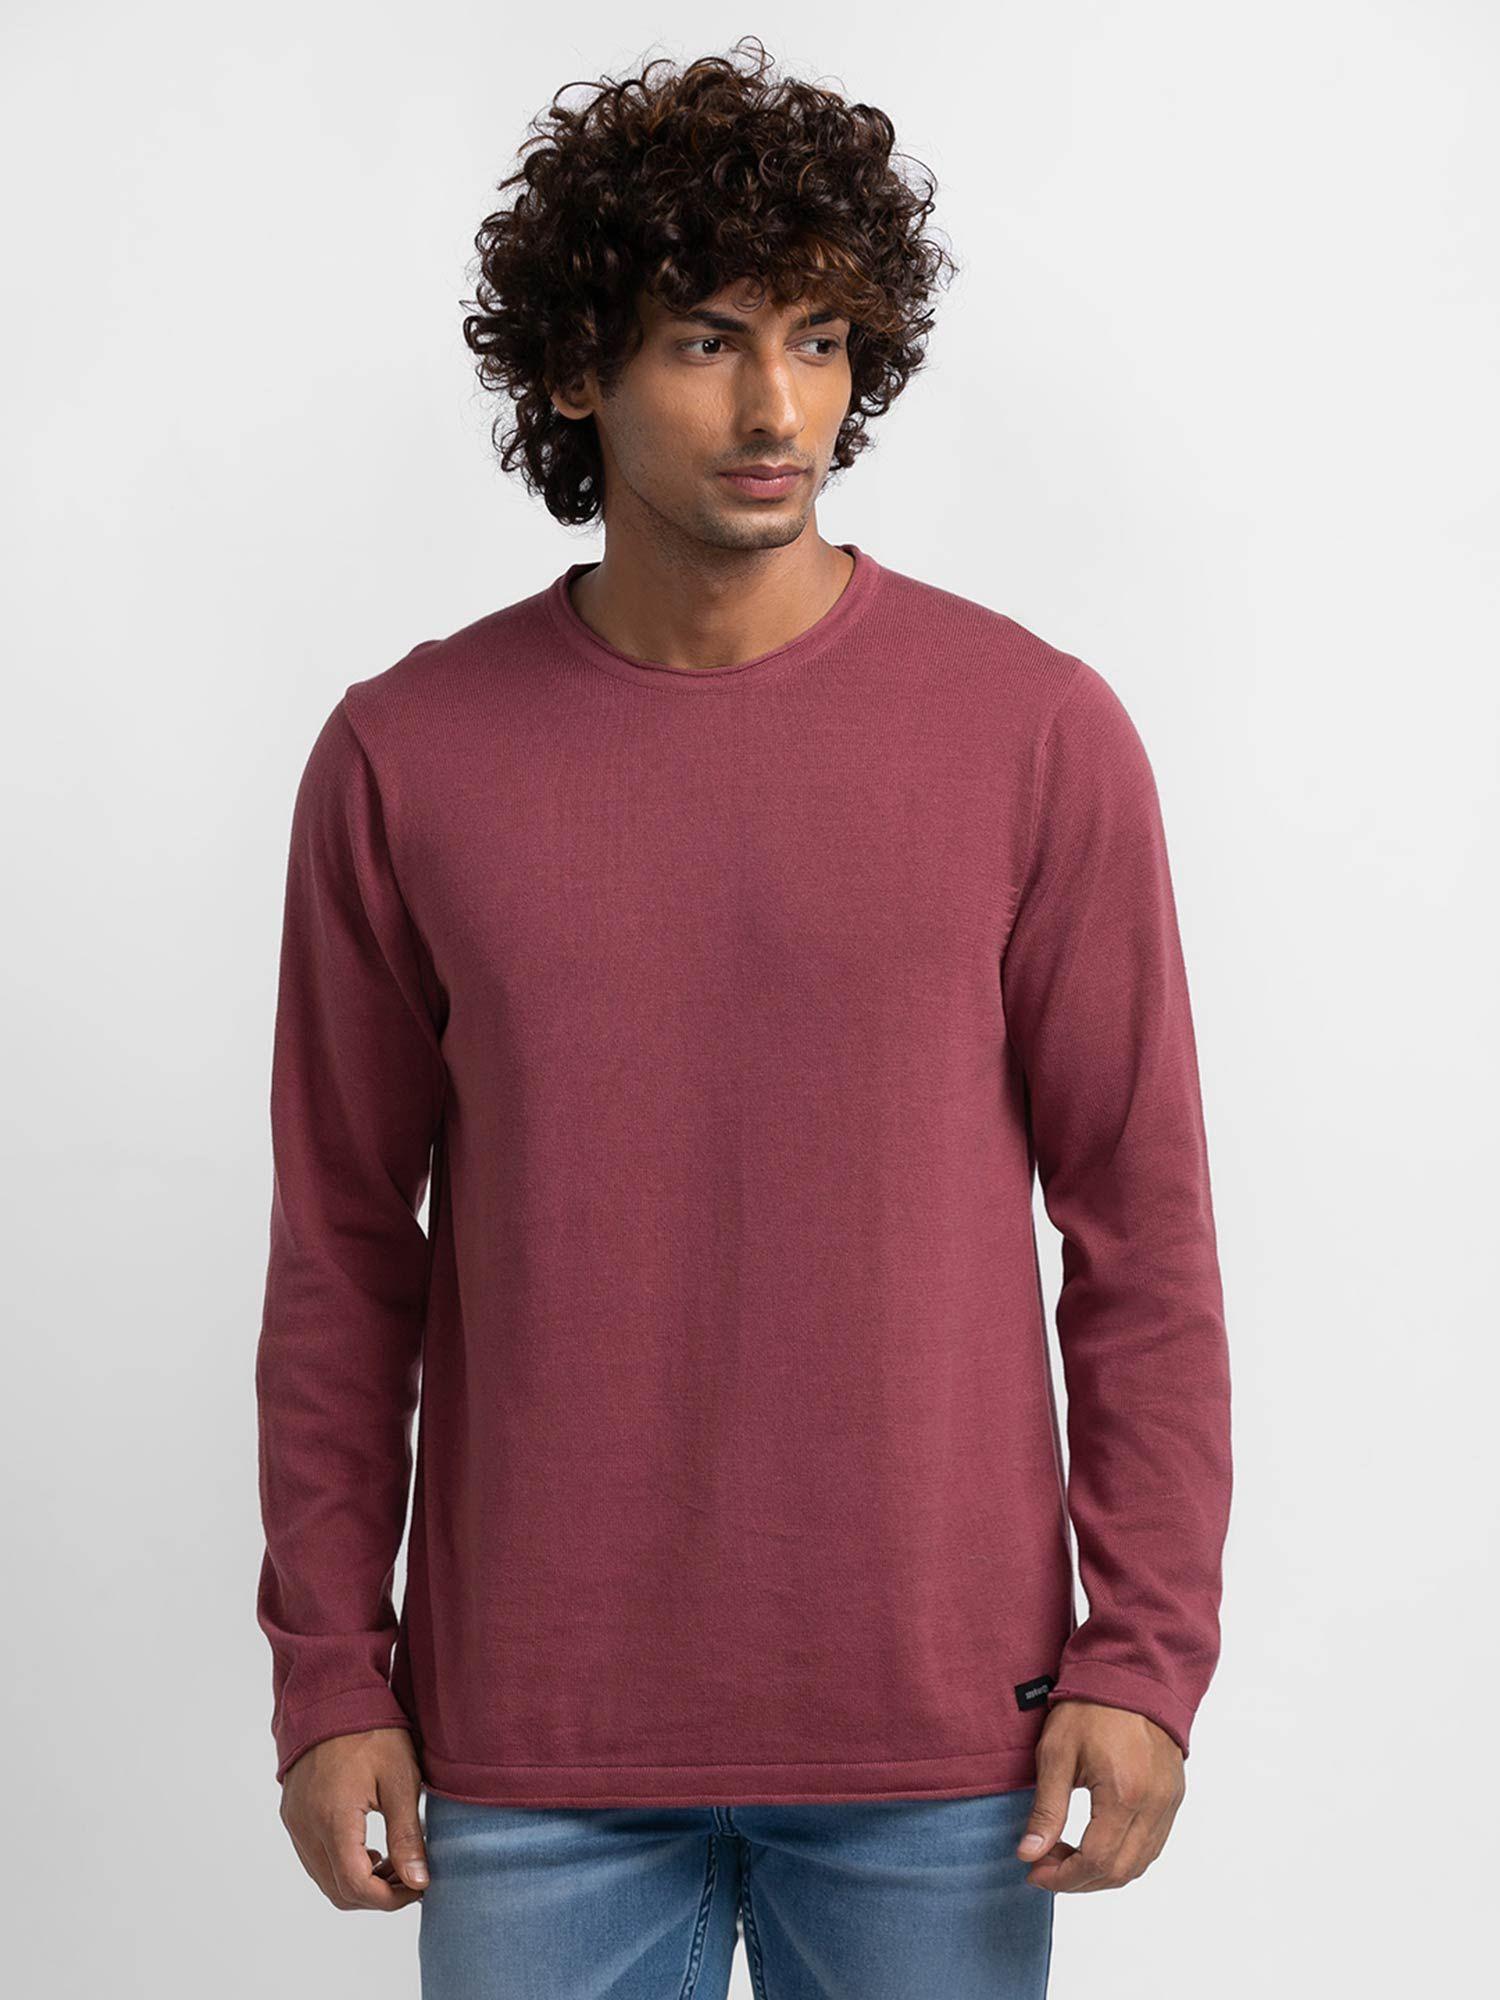 mauve red cotton full sleeve casual sweater for men